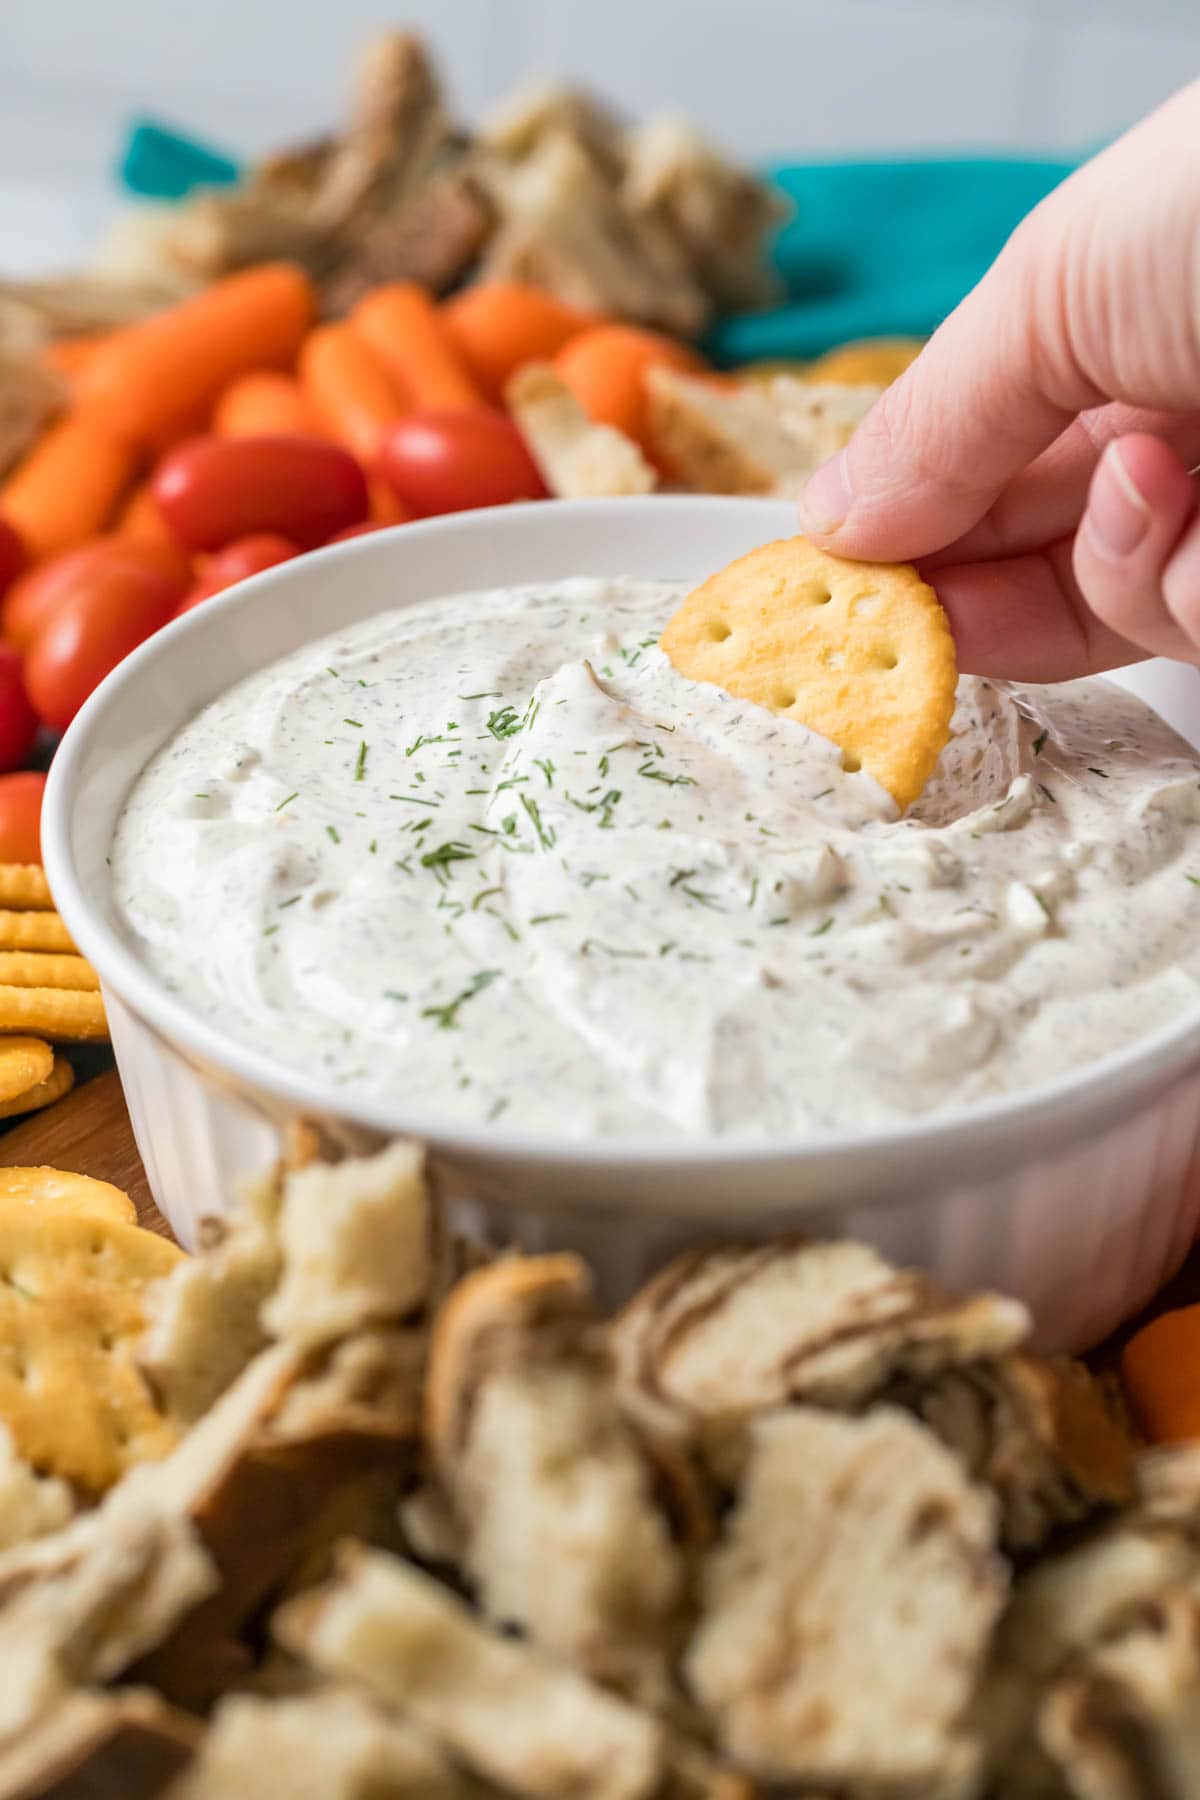 Cracker being dipped into a bowl of dill dip.